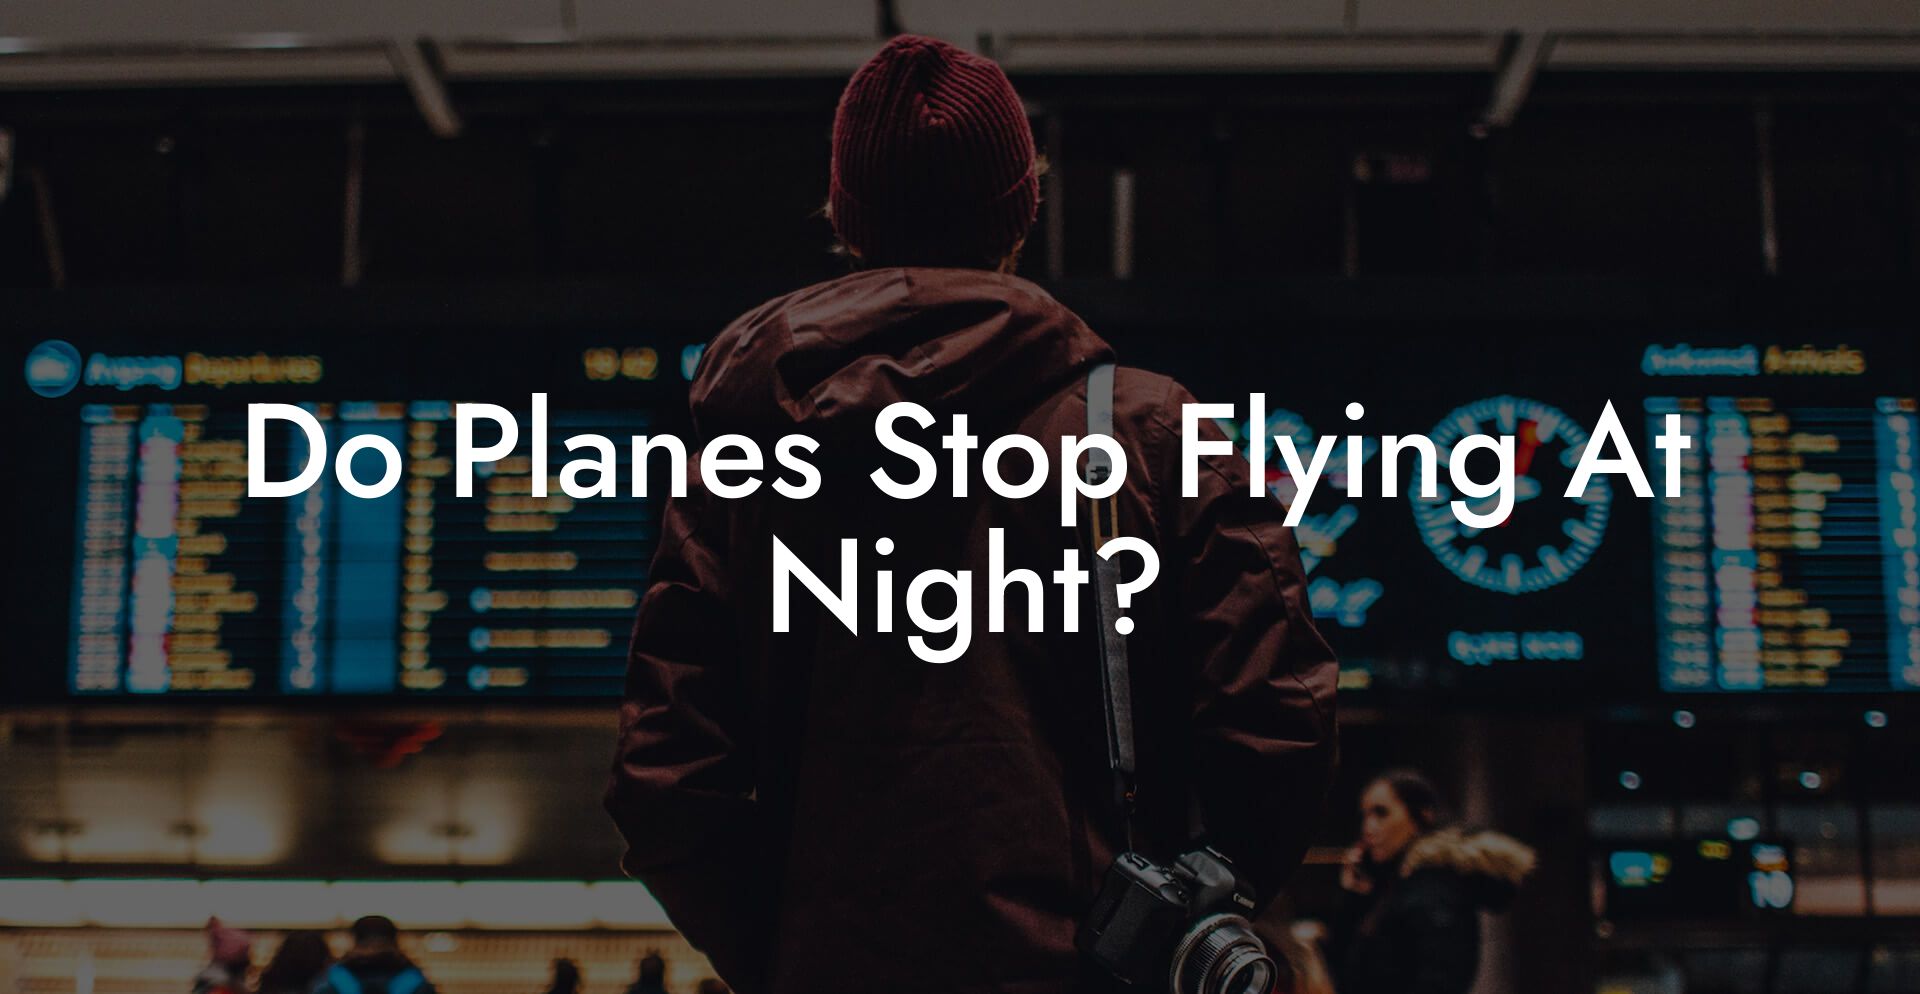 Do Planes Stop Flying At Night?